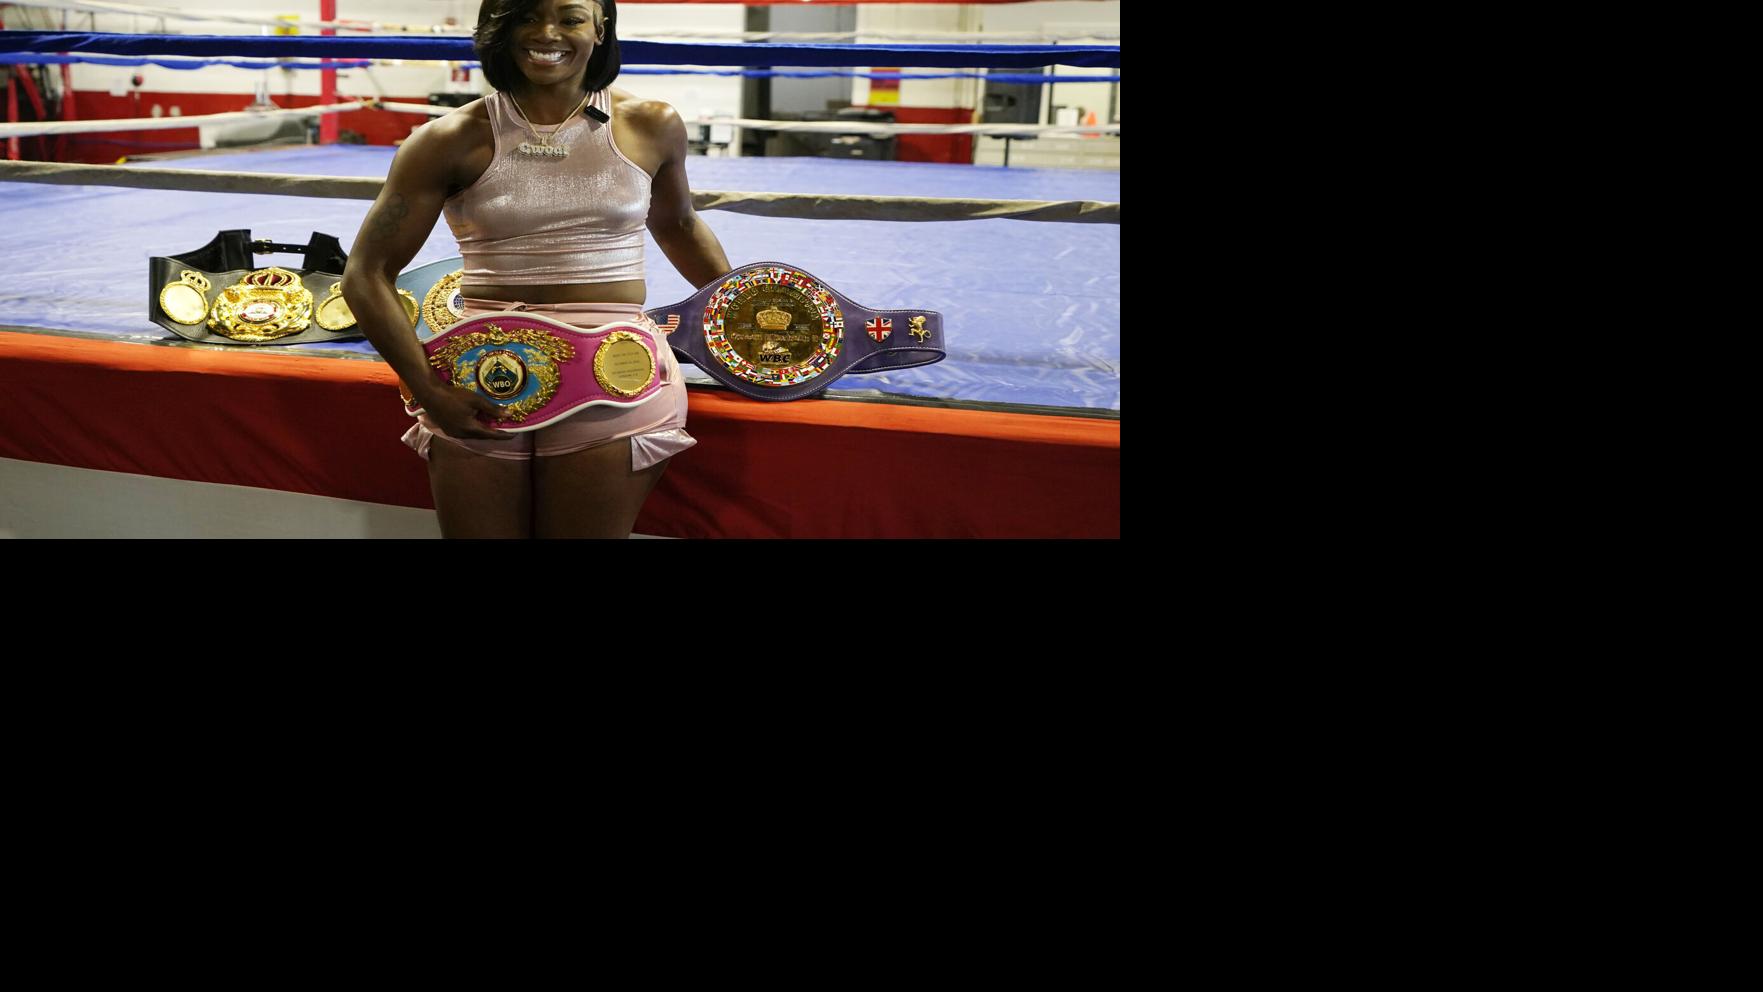 Shields fighting for gender equality for women boxers